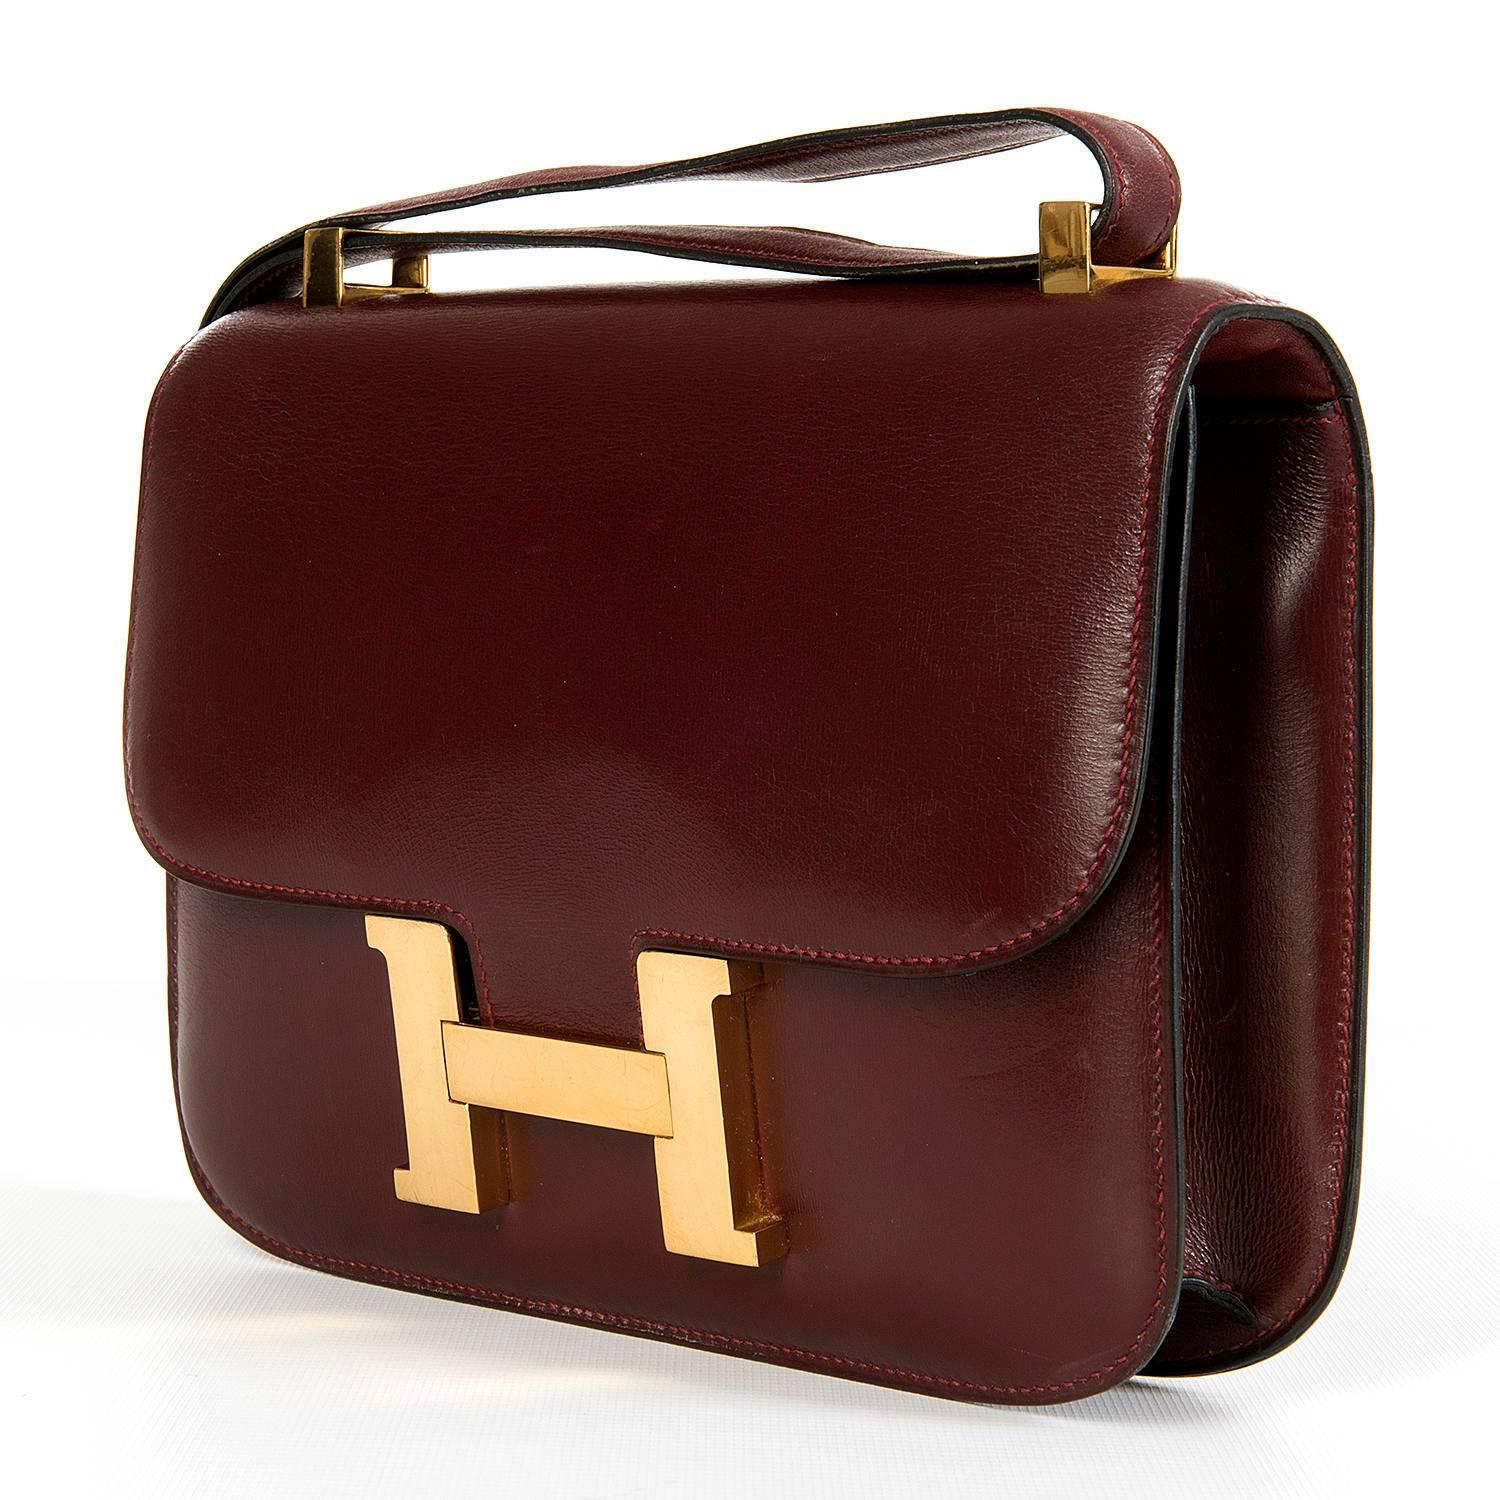 An absolutely stunning Hermes Constance bag finished in 'Rouge H' Box Leather with Gold hardware. The Constance bag was originally designed in 1959, by the legendary Hermes Designer, Catherine Chaillet, and named after her 5th child. This 'Tres